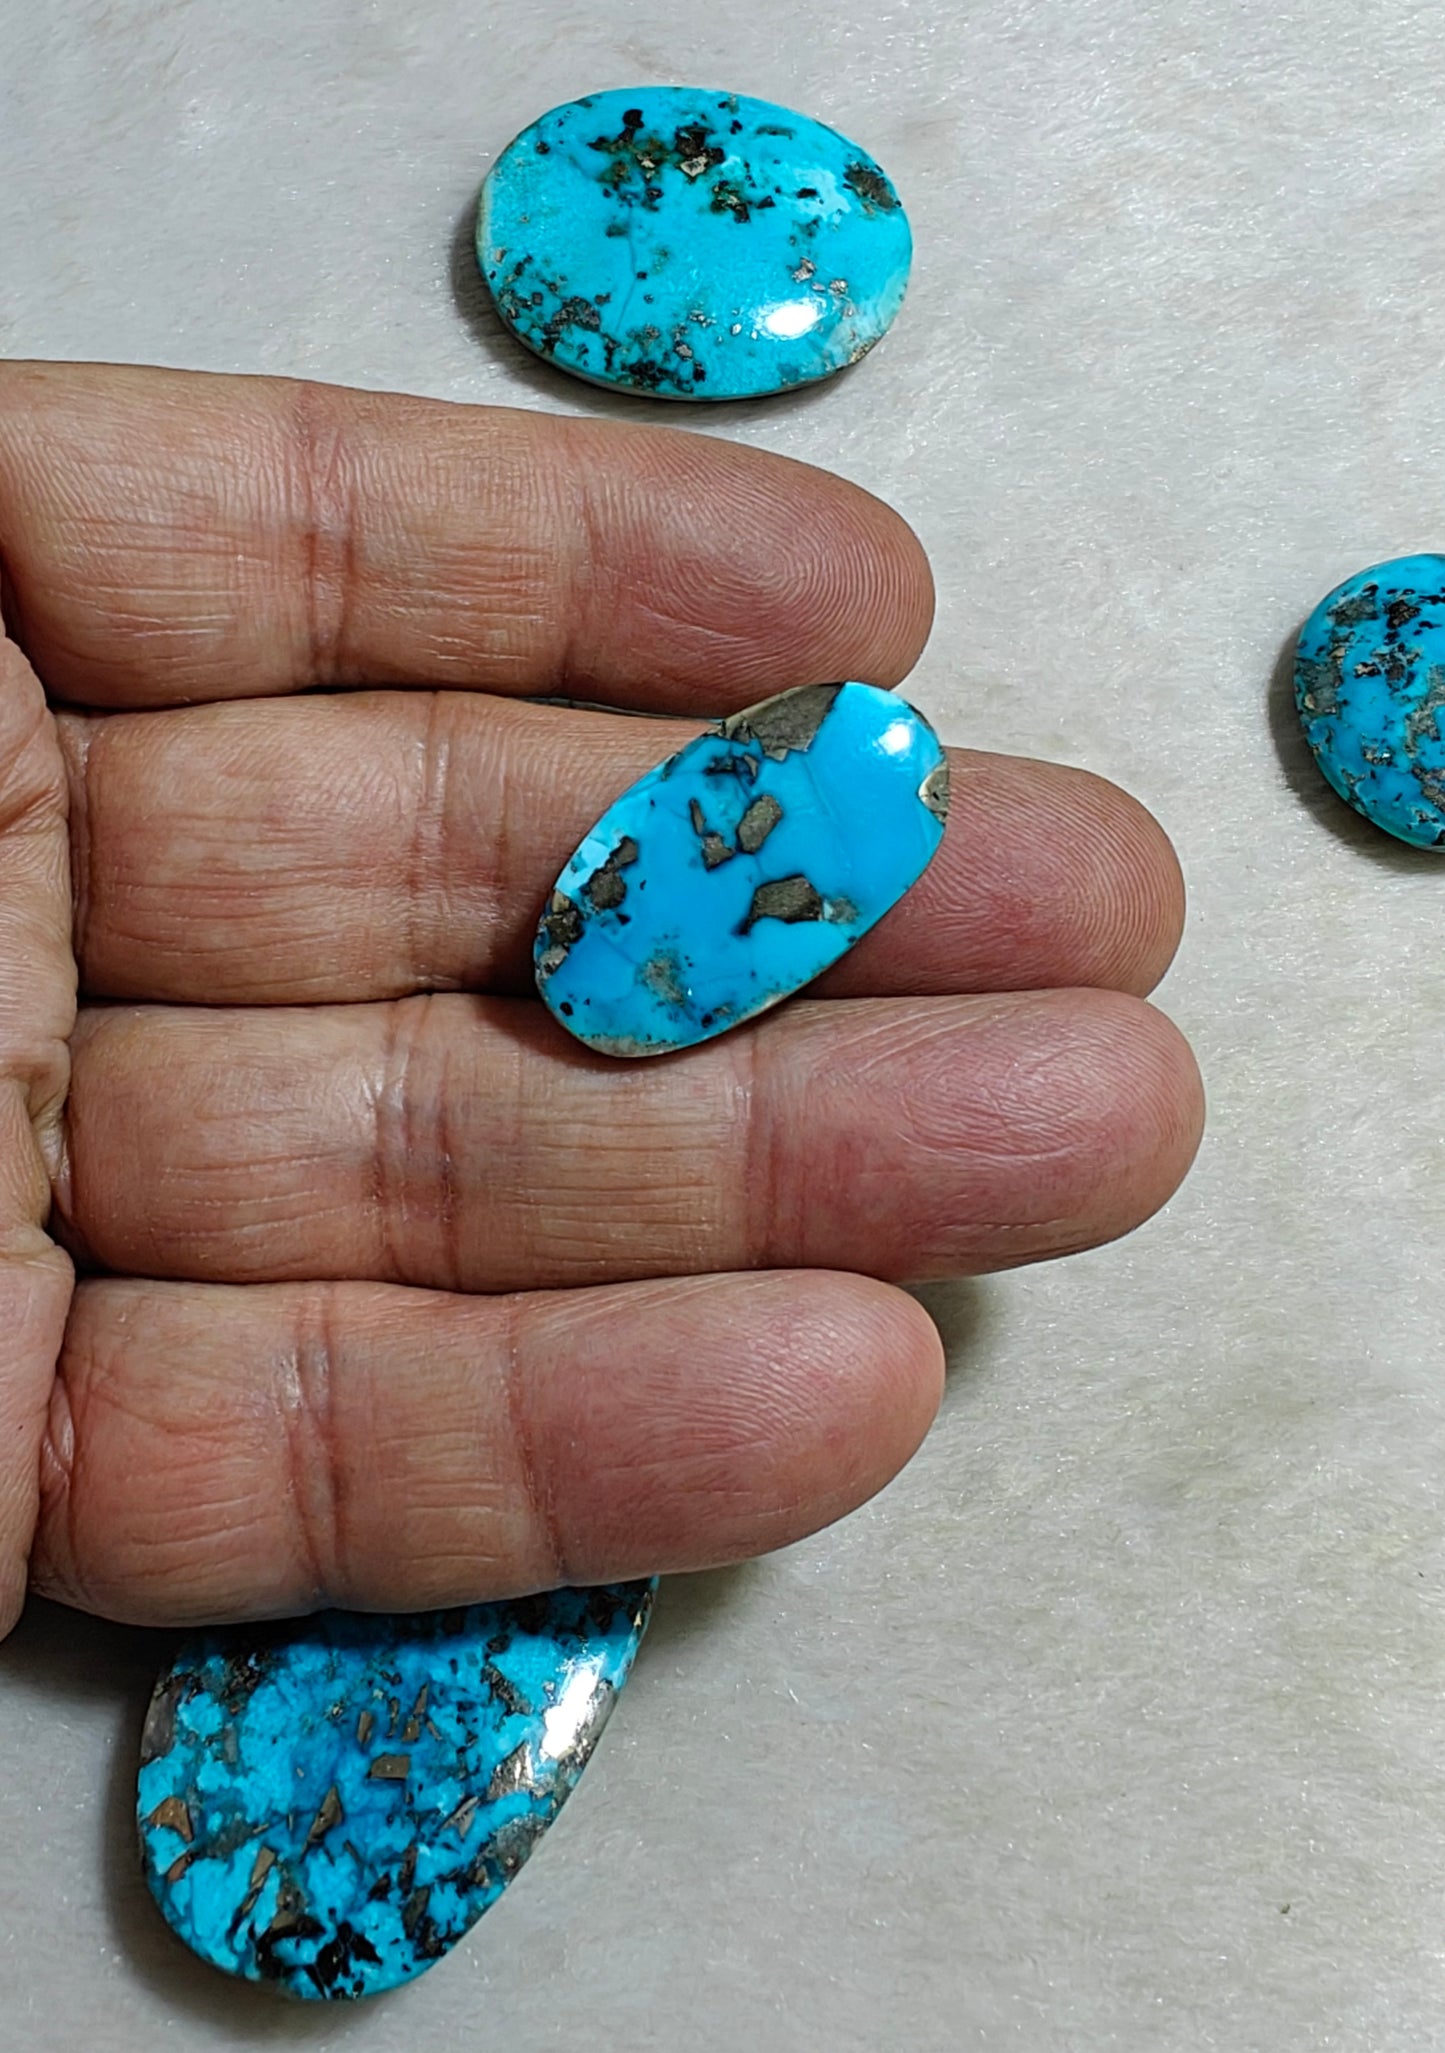 6 turquoise cabochons 82 grams